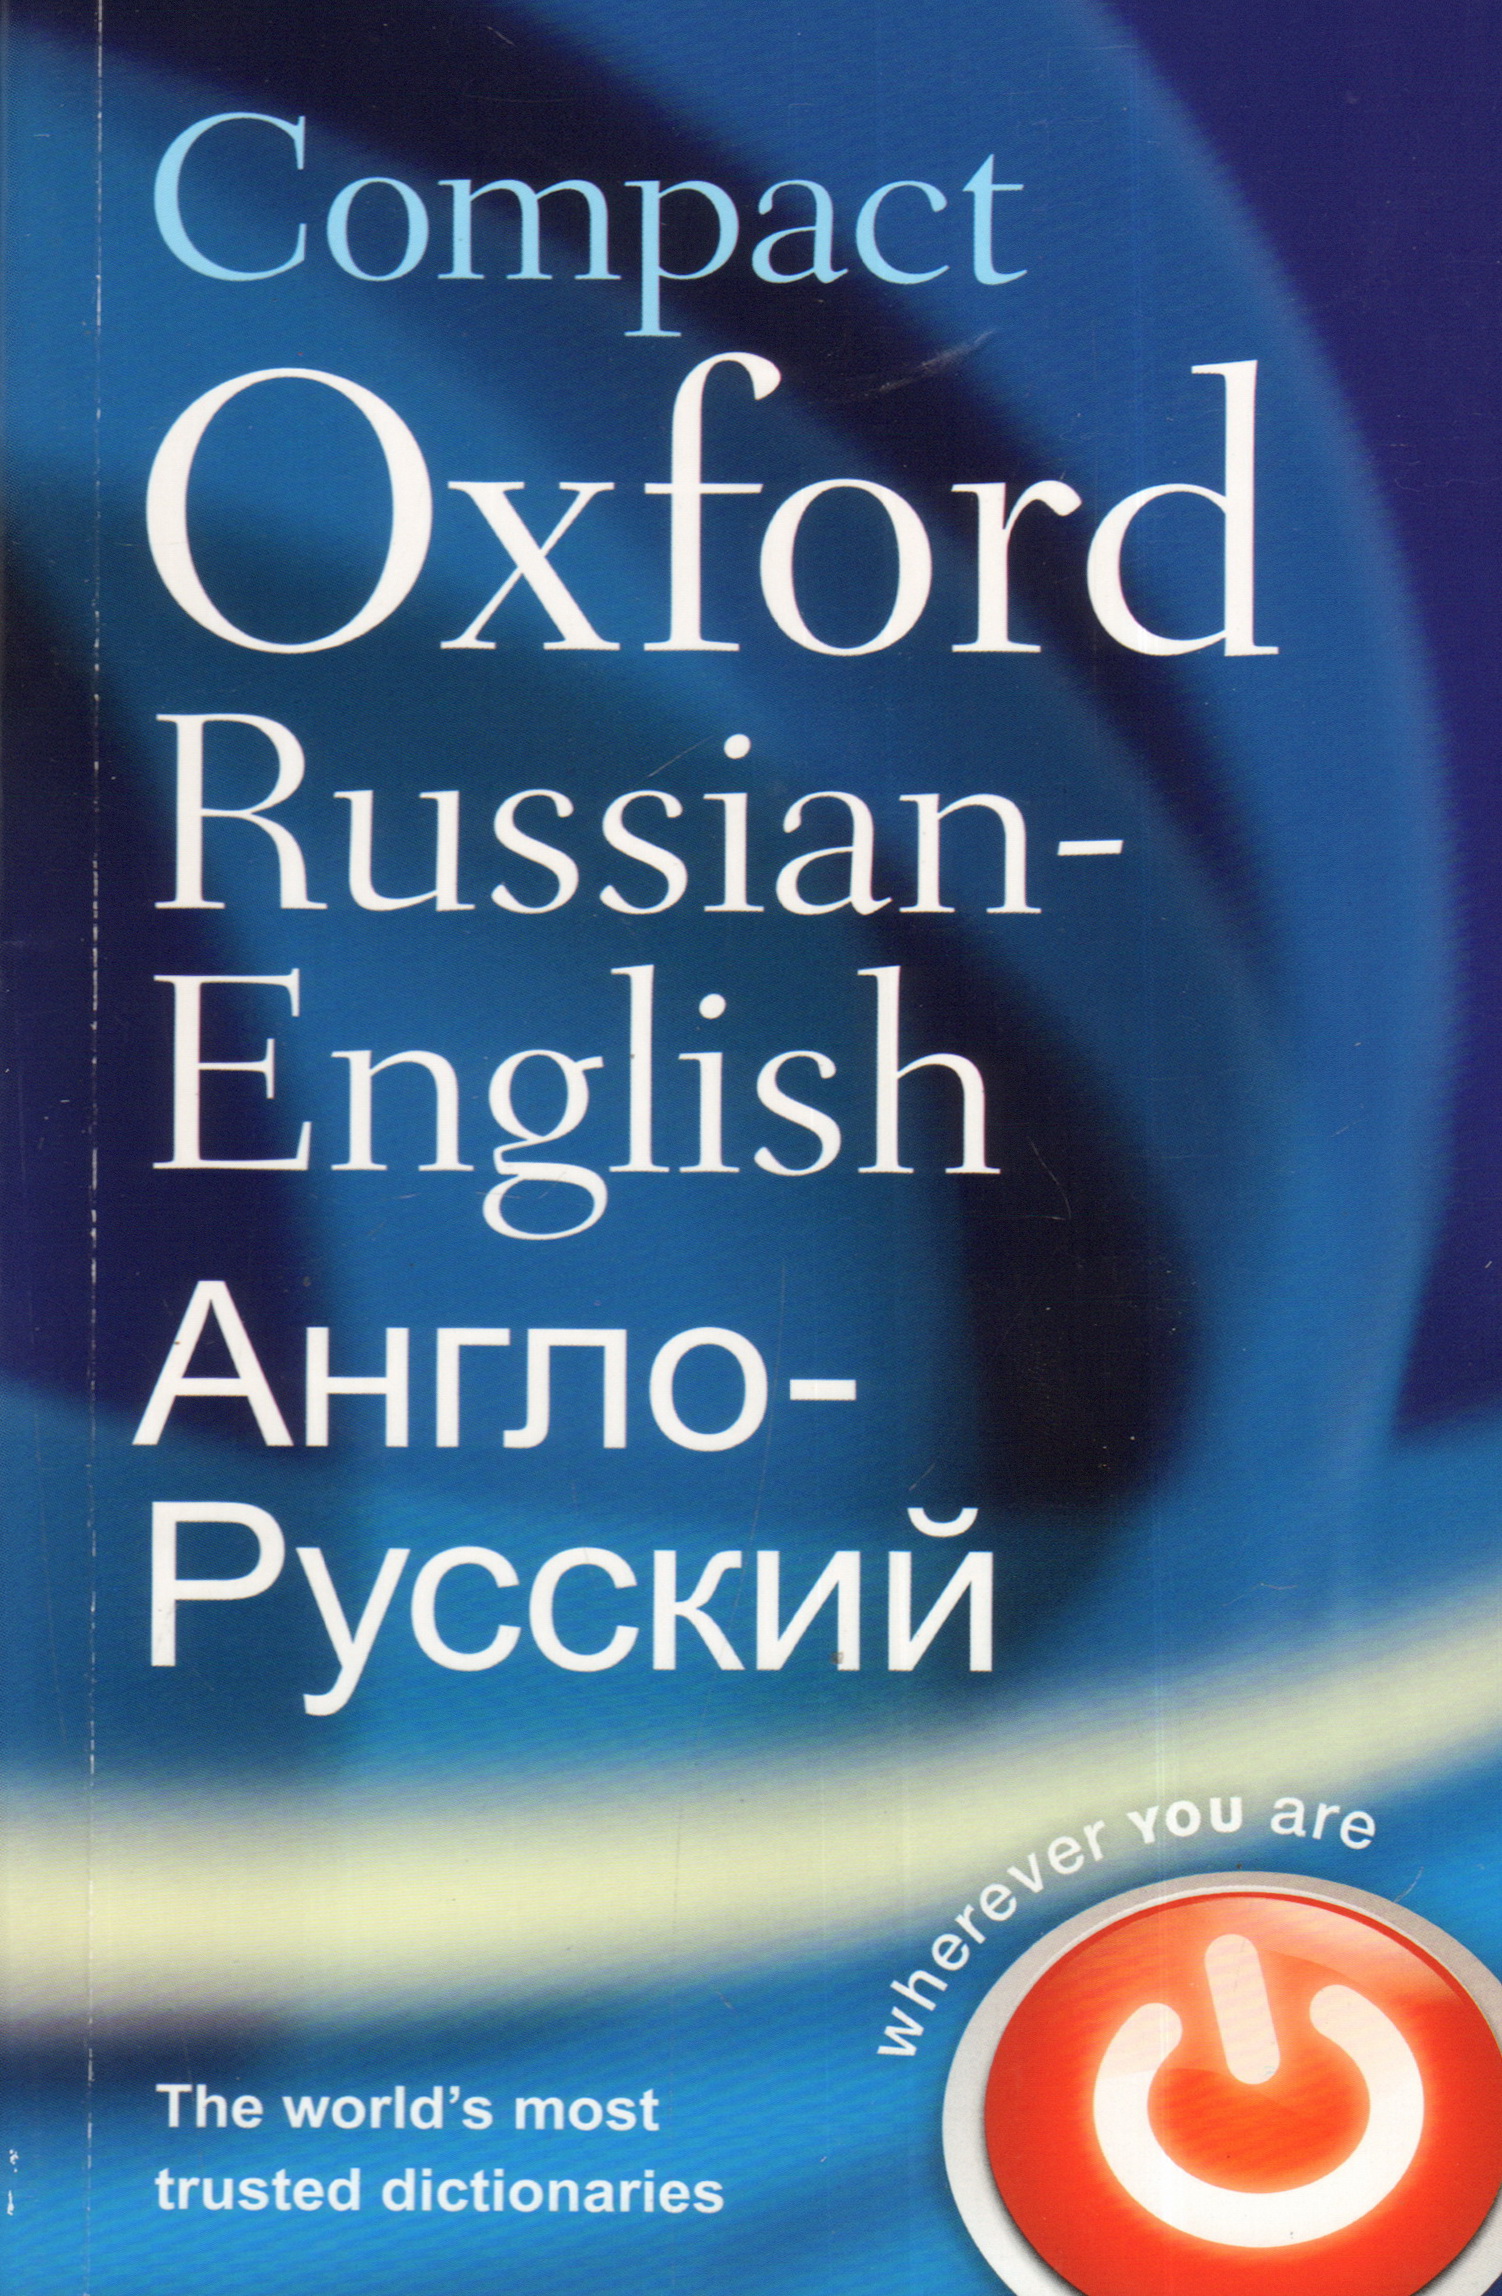 COMPACT OXFORD RUSSIAN DICTIONARY